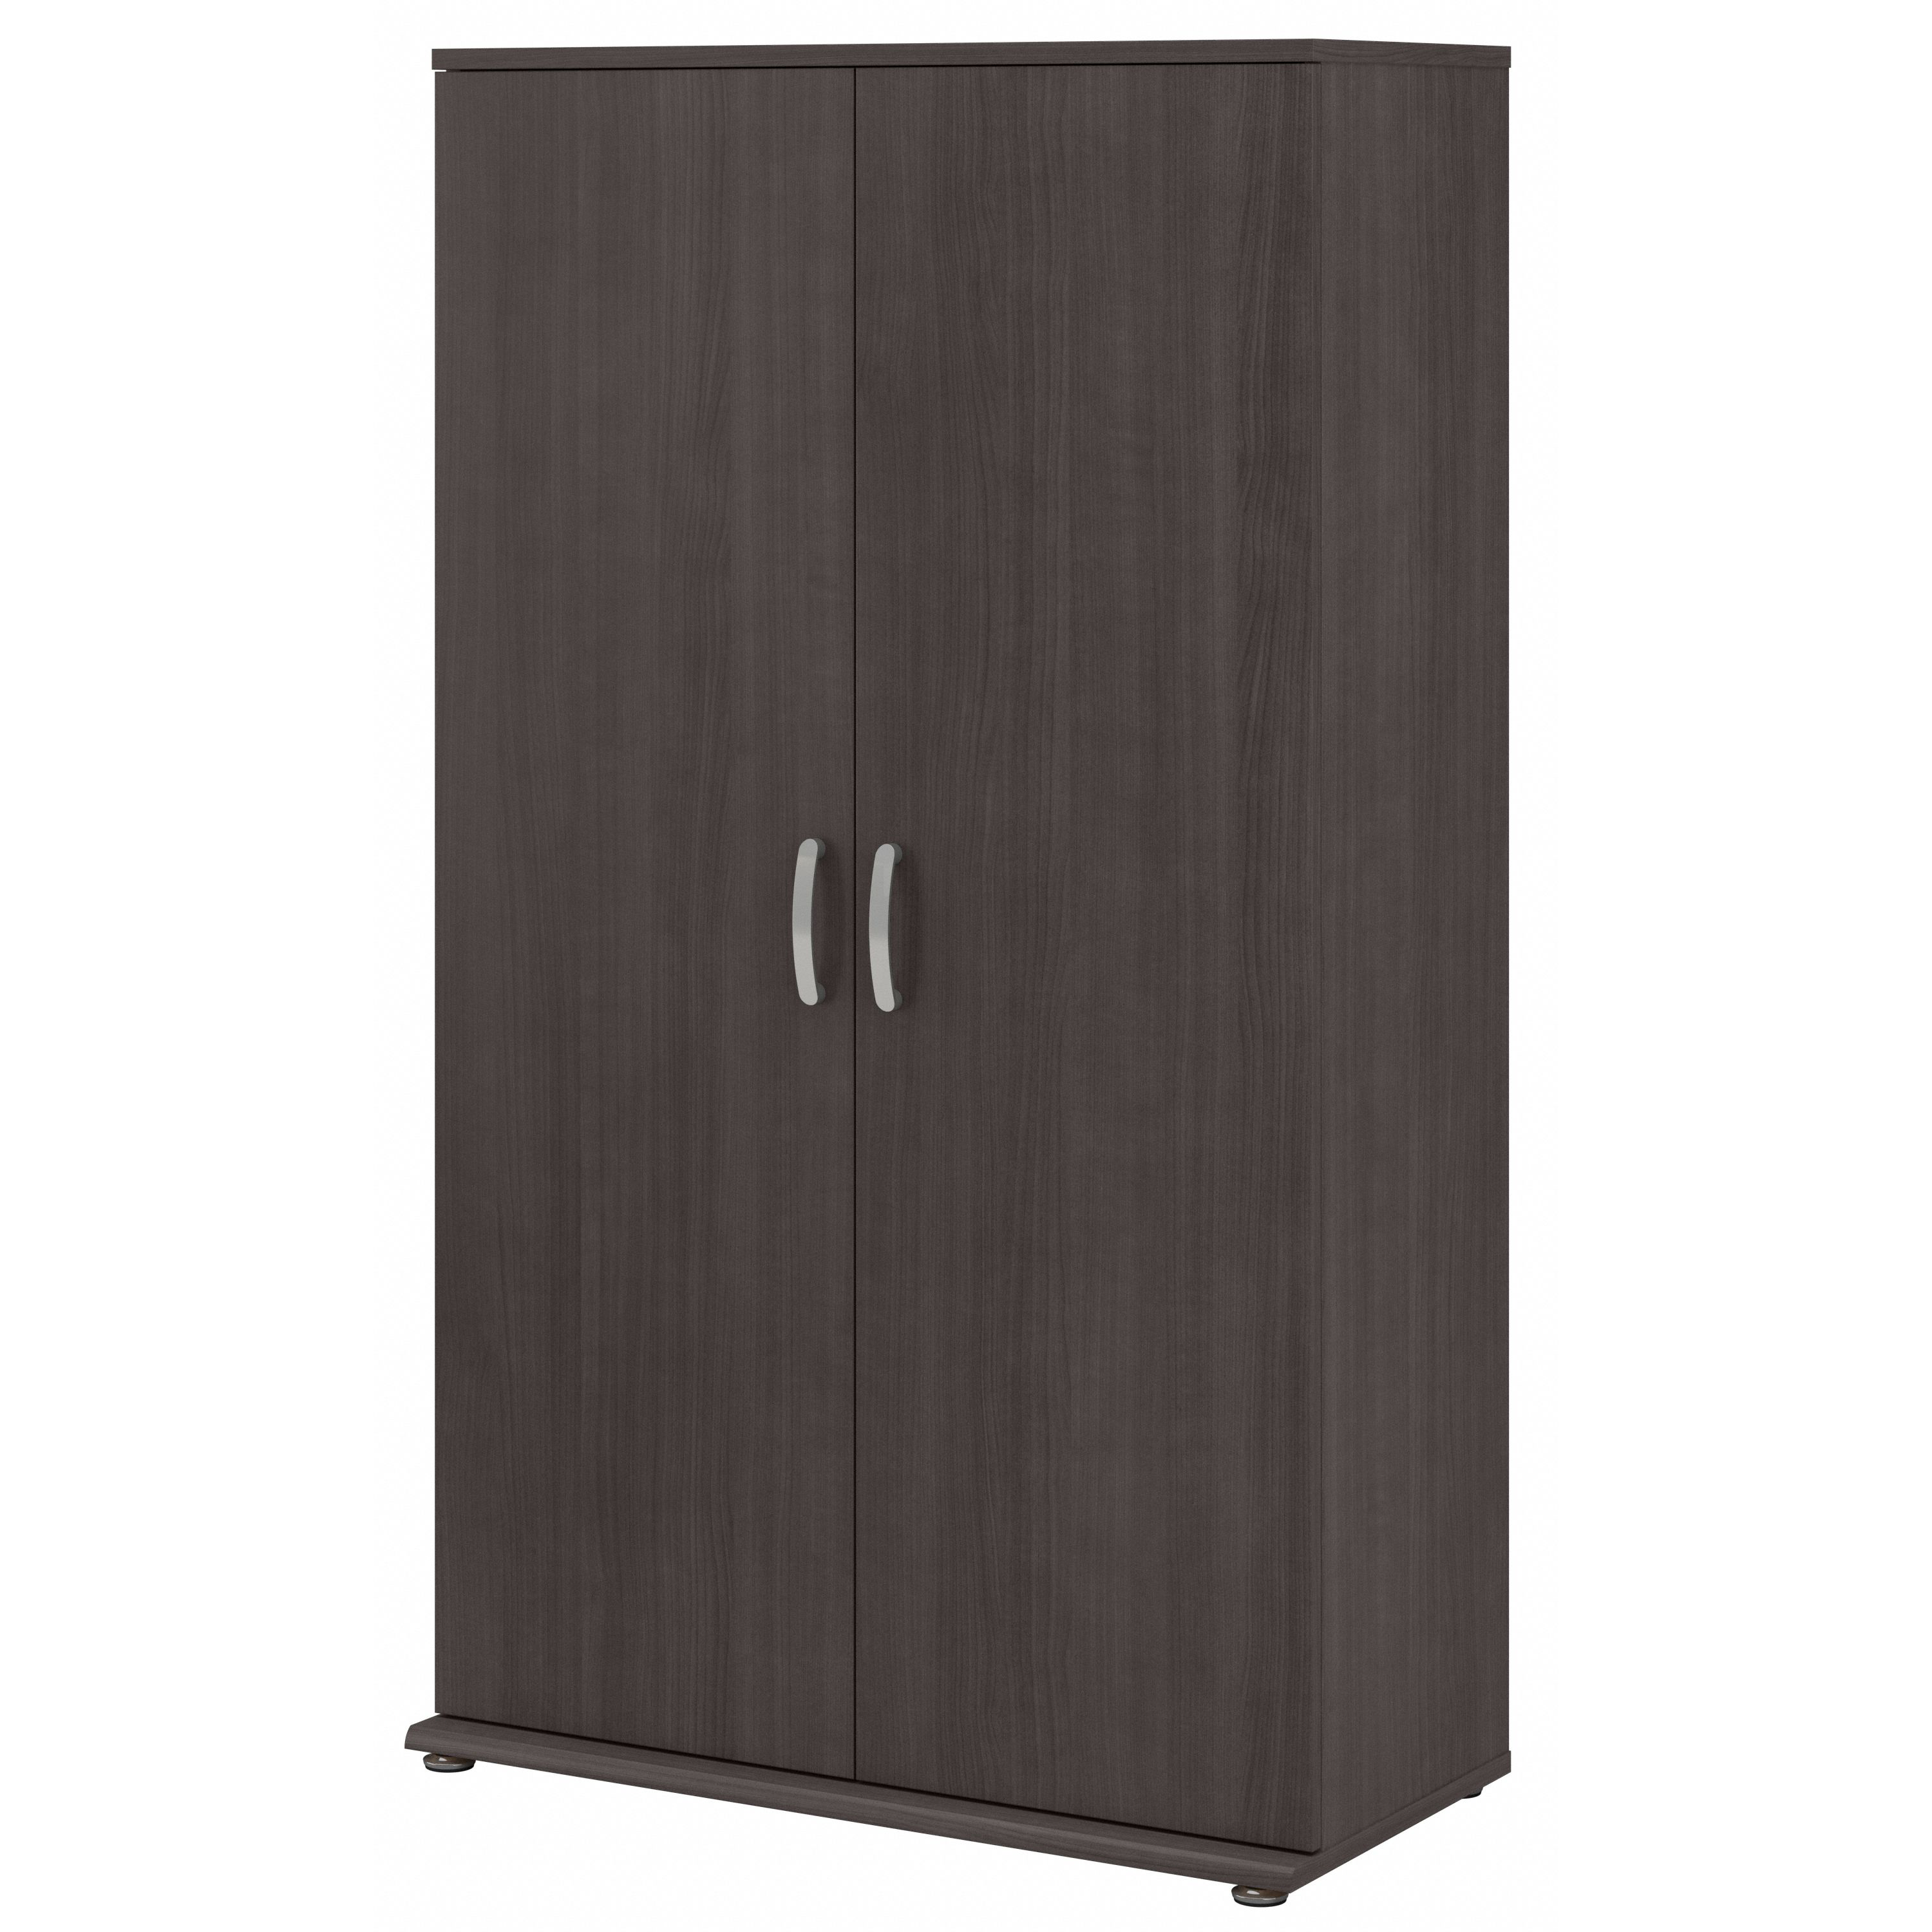 Shop Bush Business Furniture Universal Tall Garage Storage Cabinet with Doors and Shelves 02 GAS136SG-Z #color_storm gray